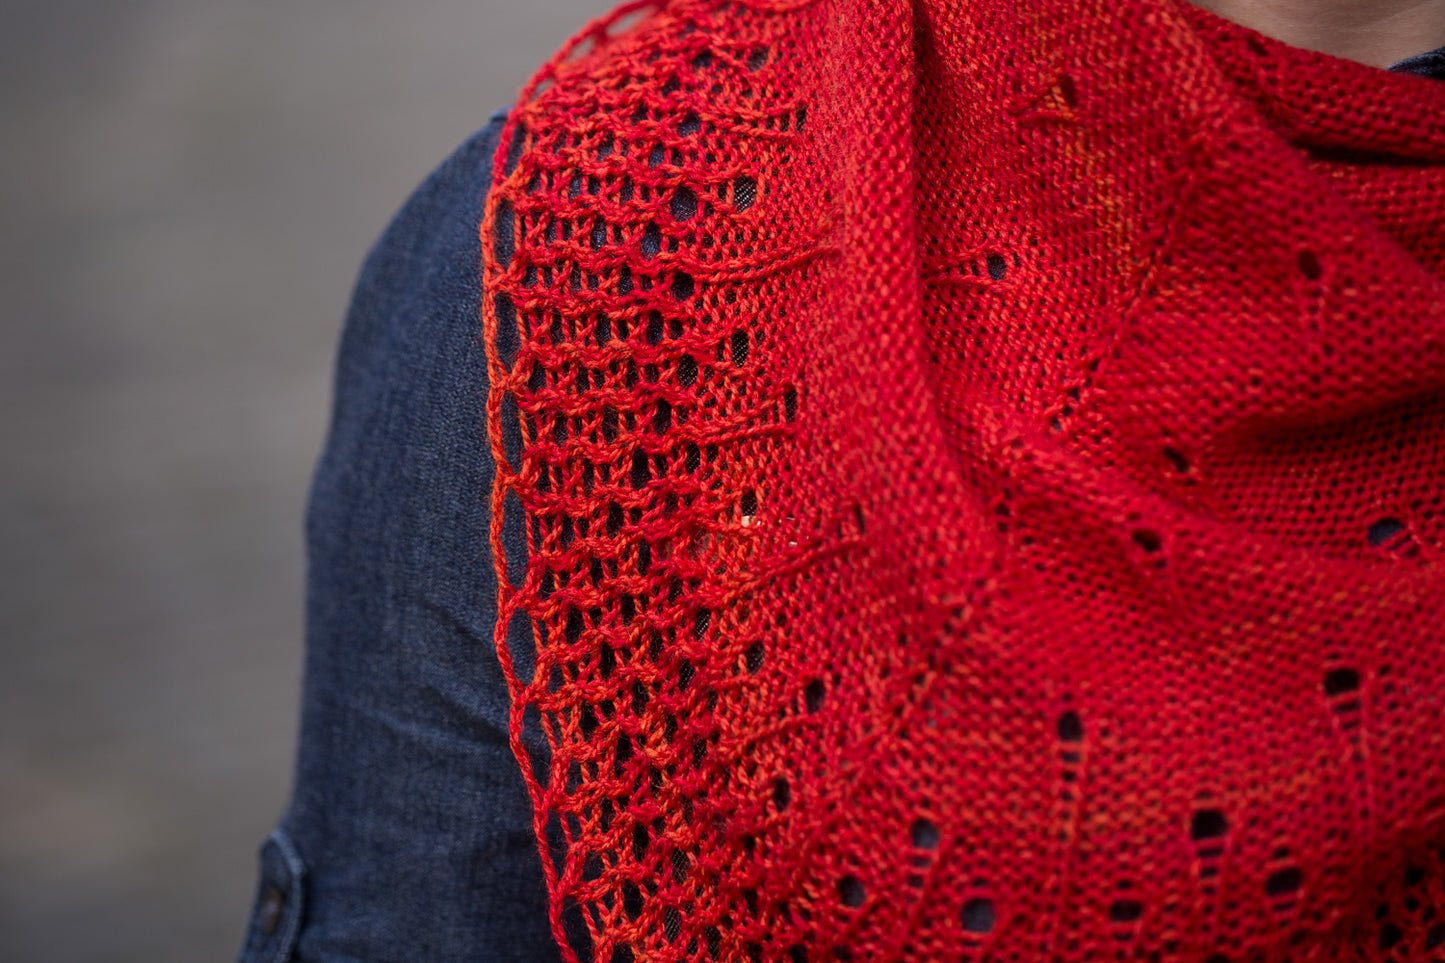 Shawl knitting pattern by Ysolda Teague, Carino and her step by step video